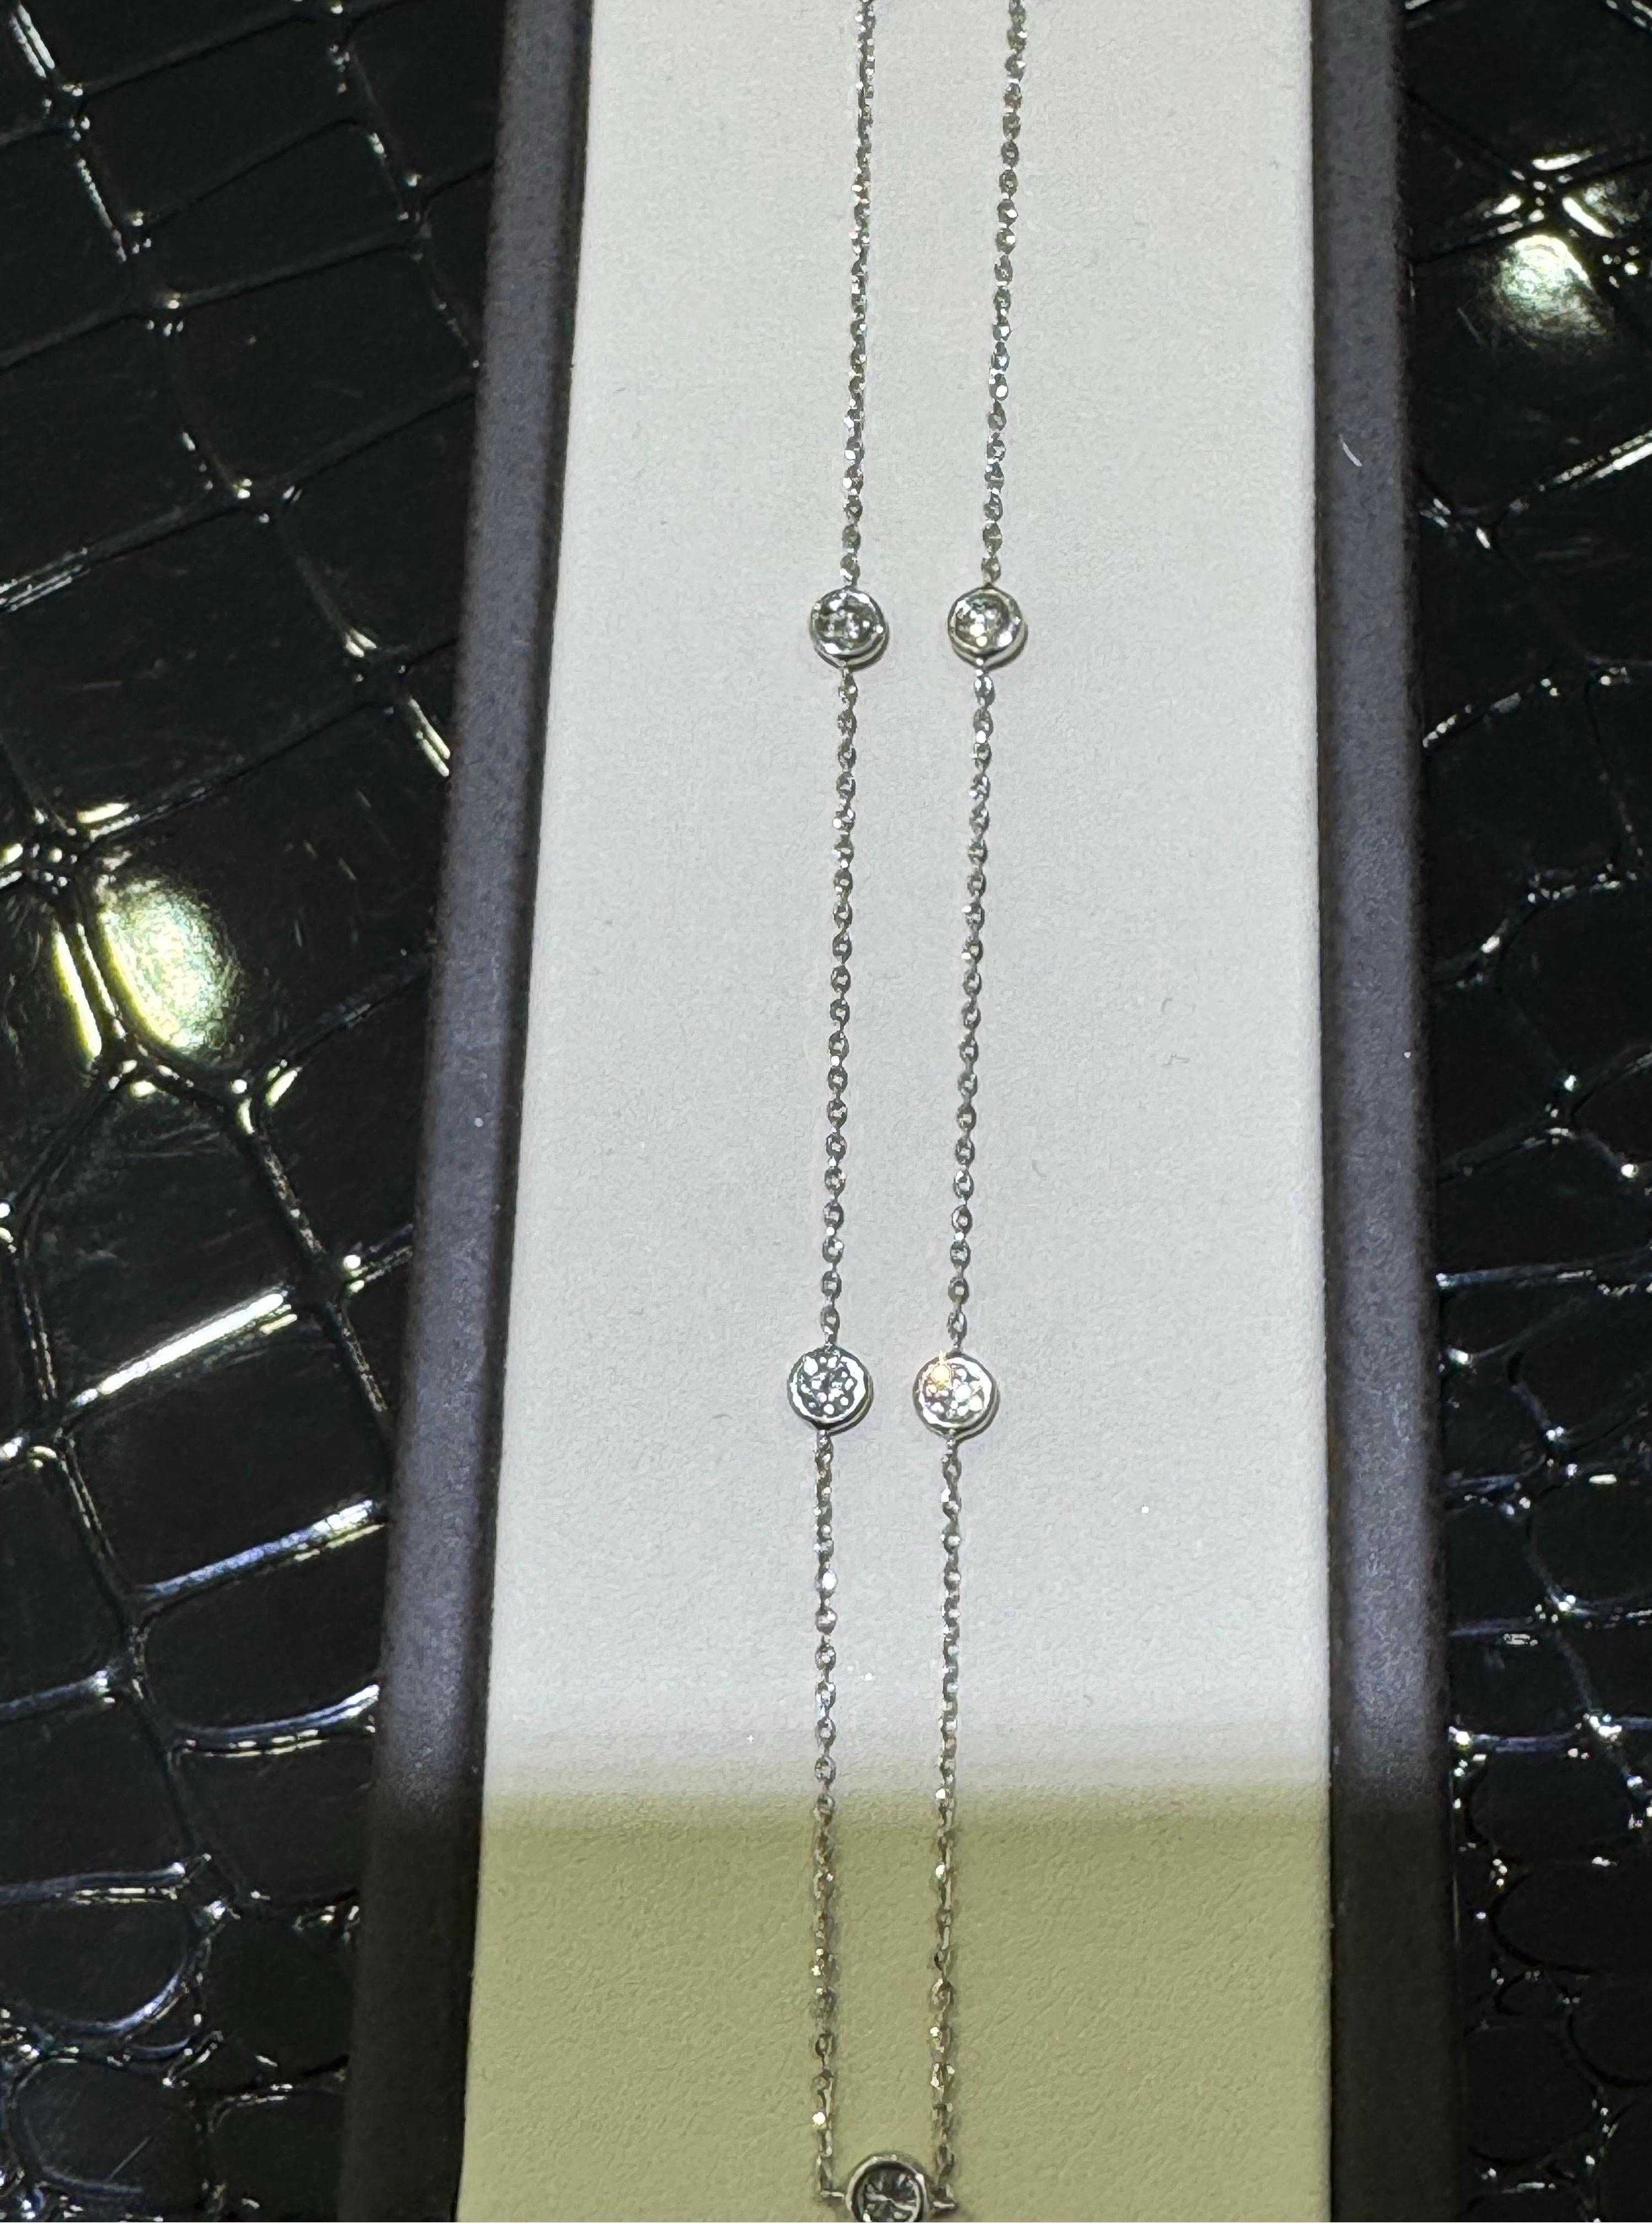 Diamond By The Yard Necklace In 14k White Gold .

9 diamonds 0.86 ctw. Length is adjustable by 16”, 17” or 18”.